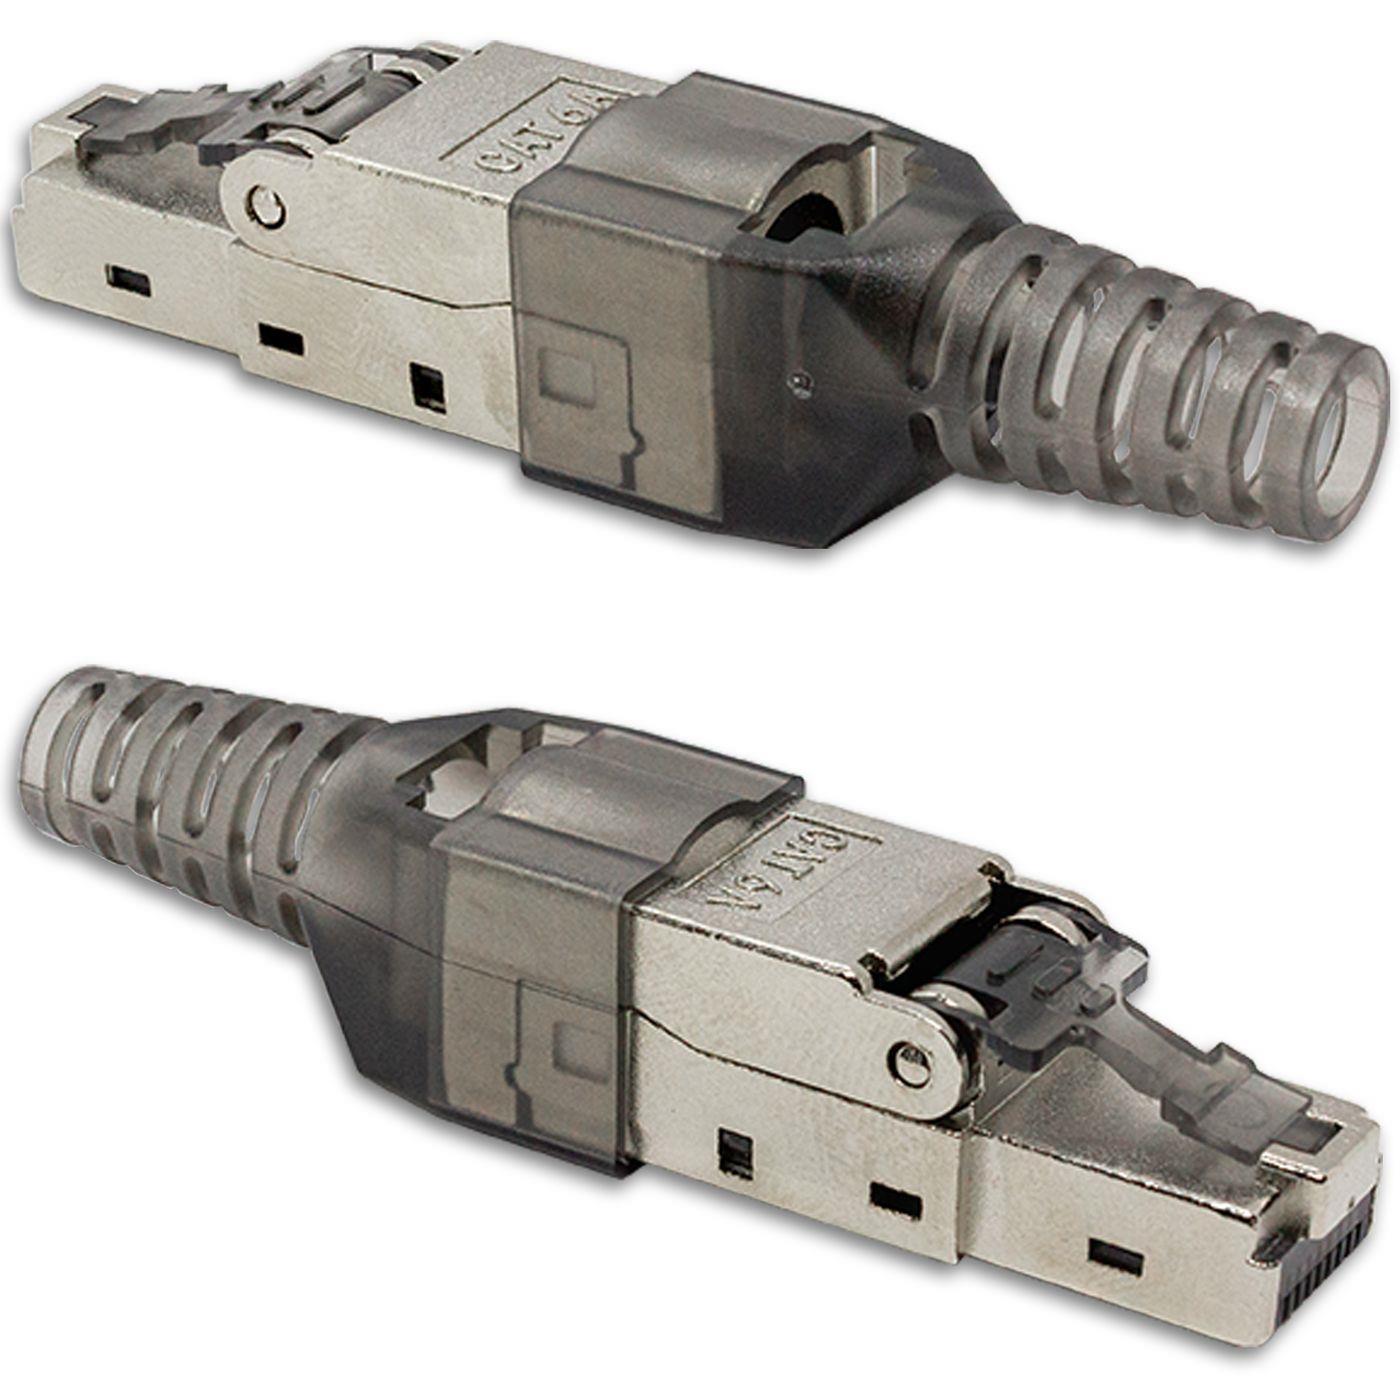 Network connector toolless RJ45 Metal Plug CAT6A LAN gold plated contacts Cat 6a Without tool Patch Cable CAT6 CAT5